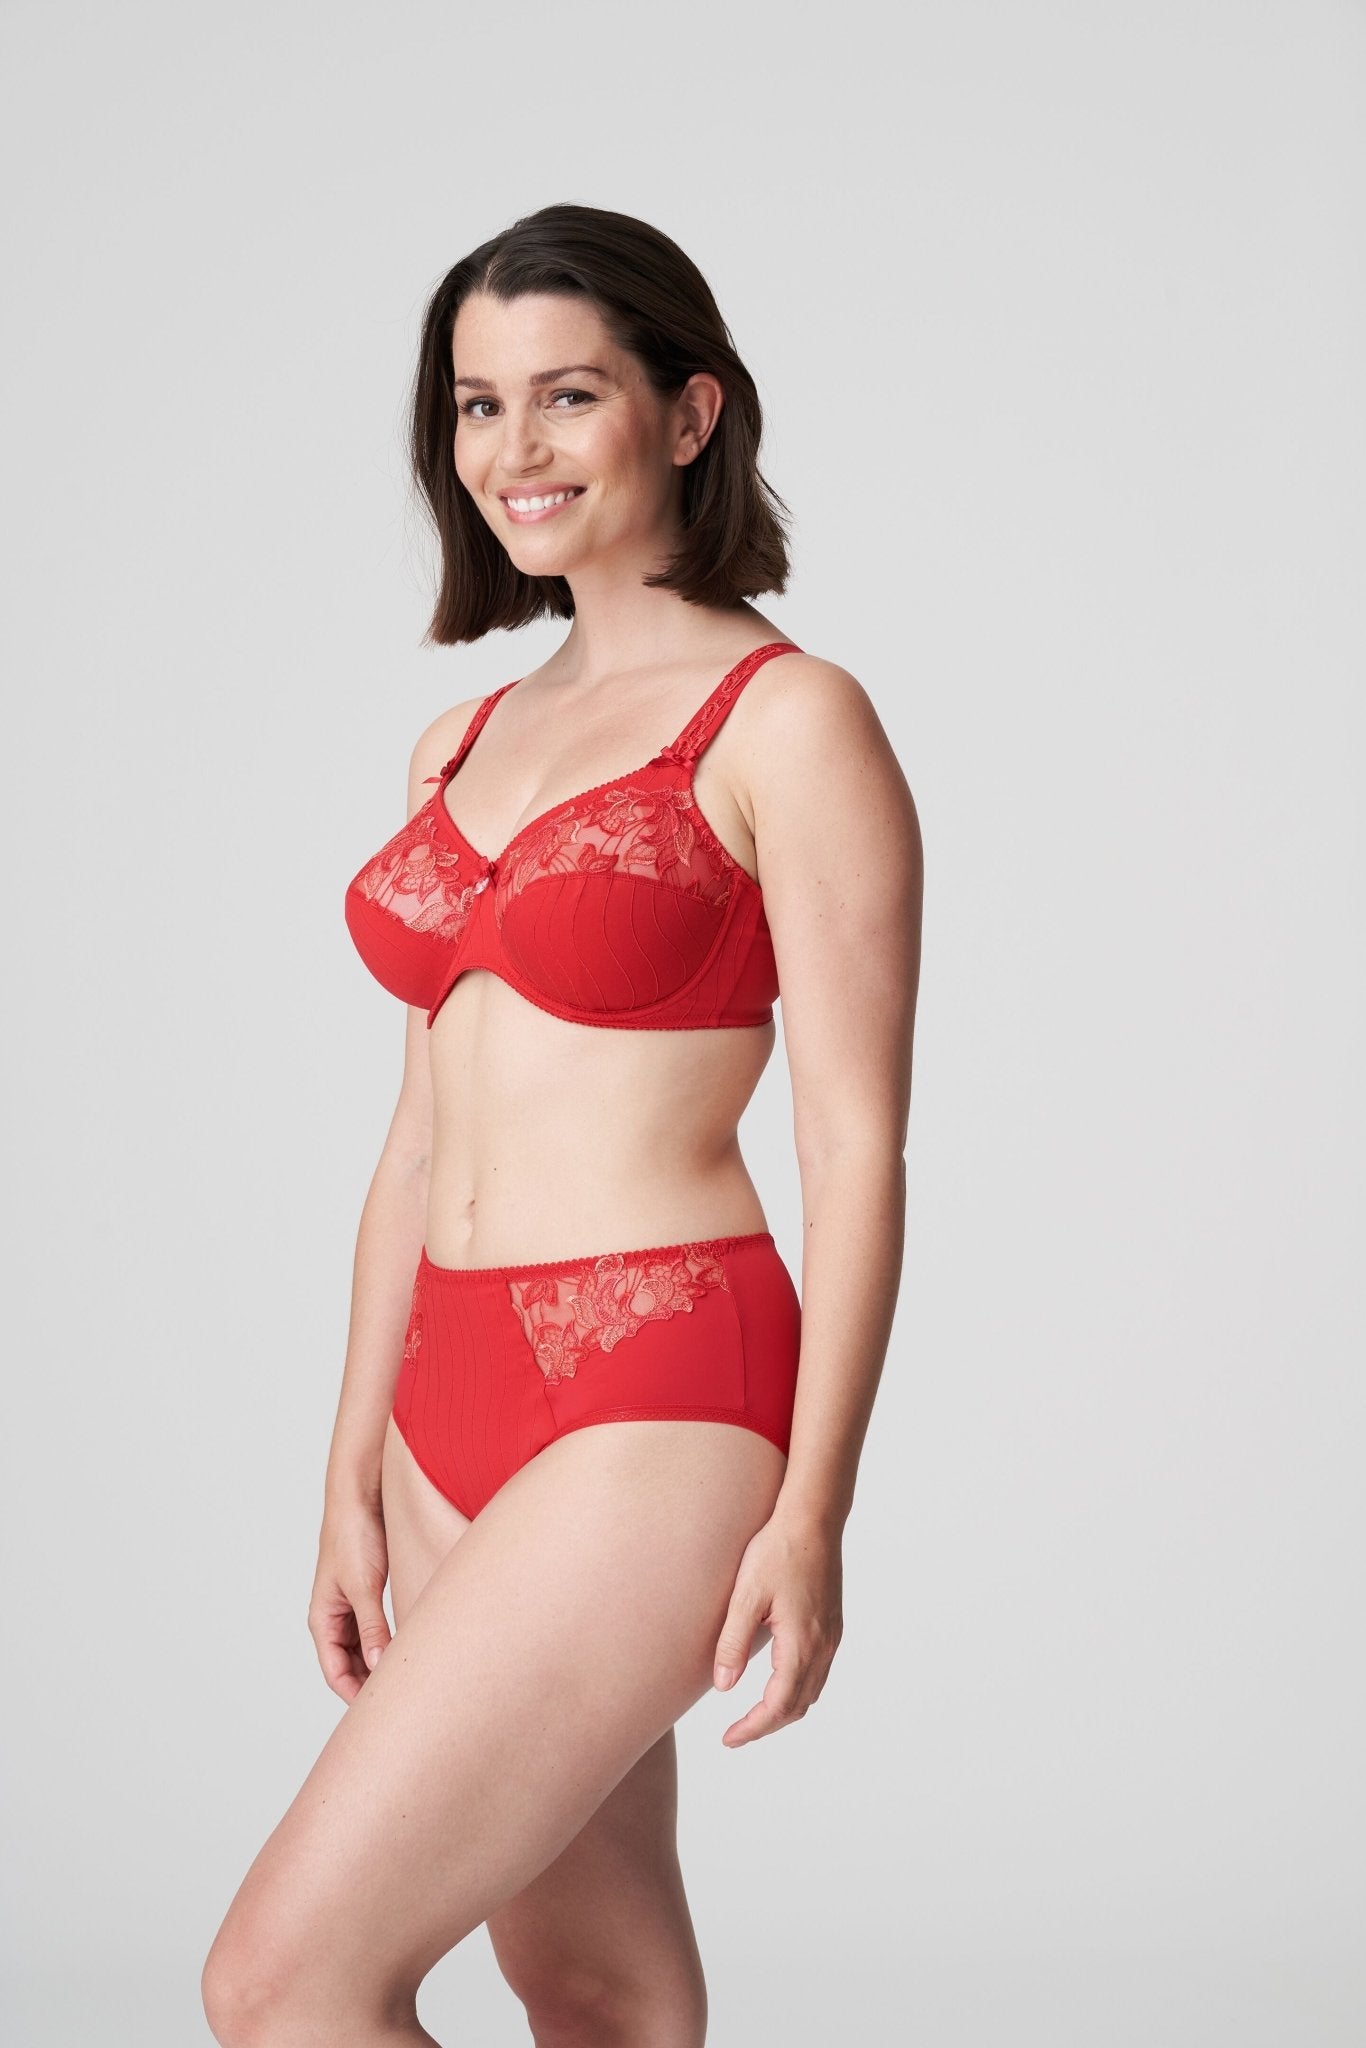 Deauville Cheeky Brief - Pinned Up Bra Lounge